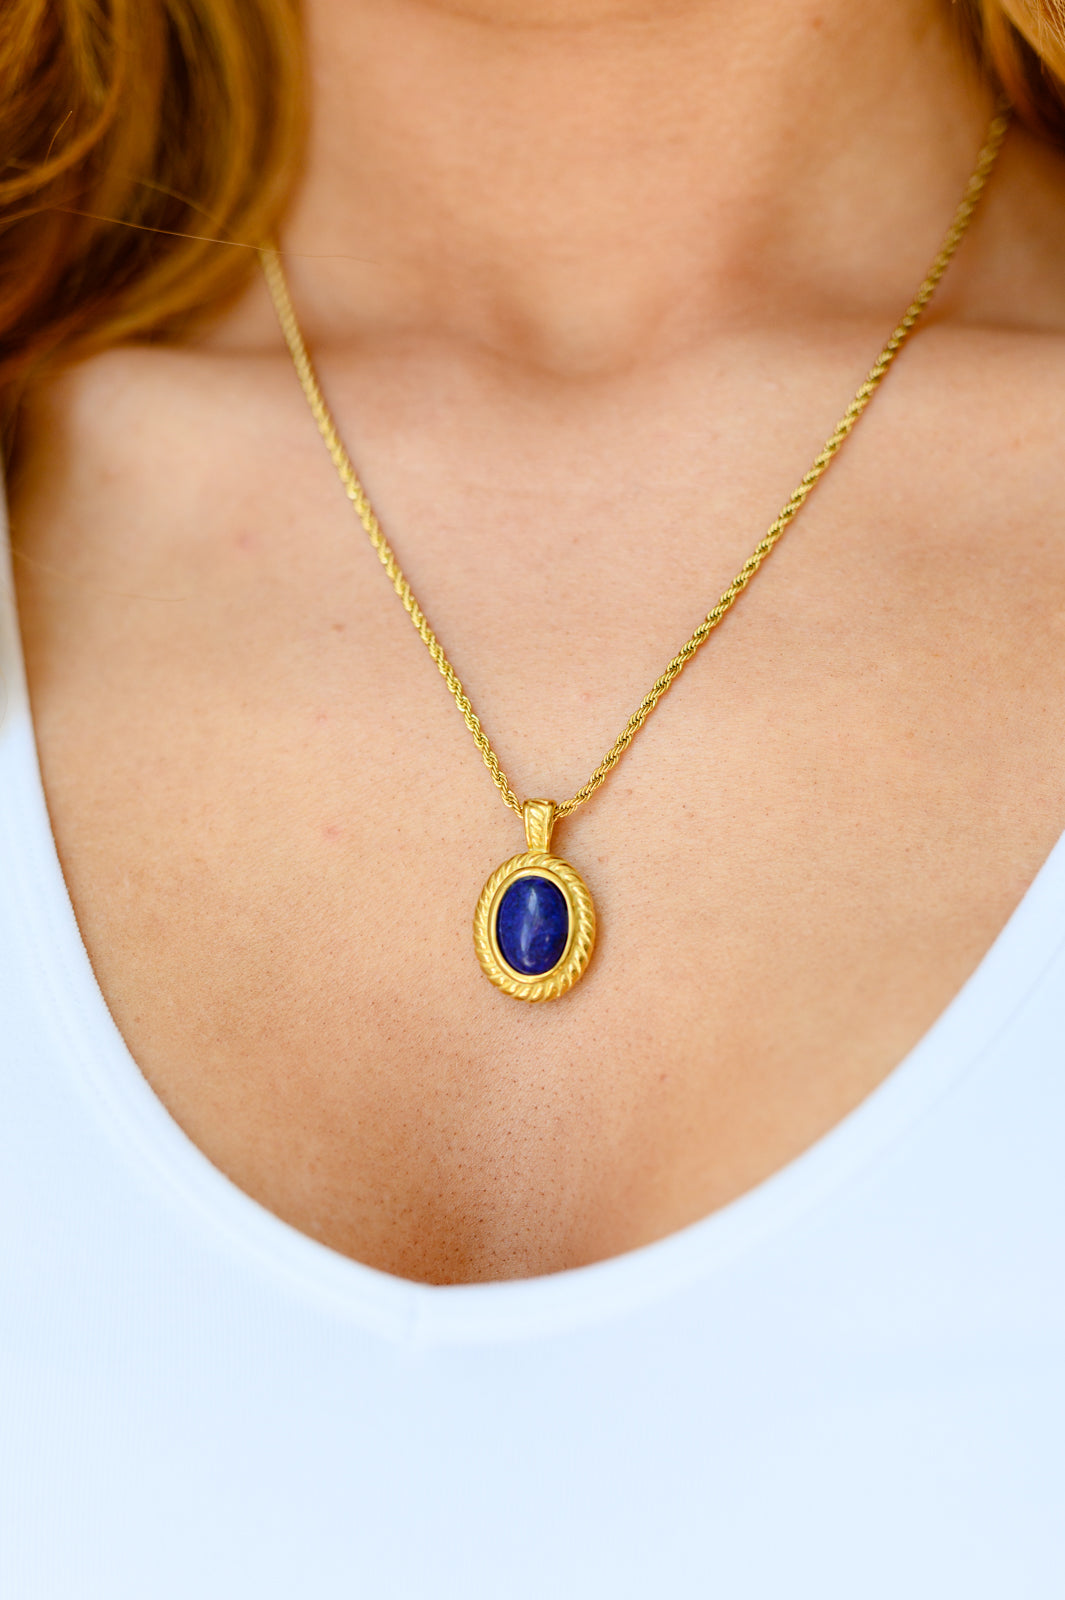 Lovely Lapis Lazuli Pendent Necklace (Ships in 1-2 Weeks)